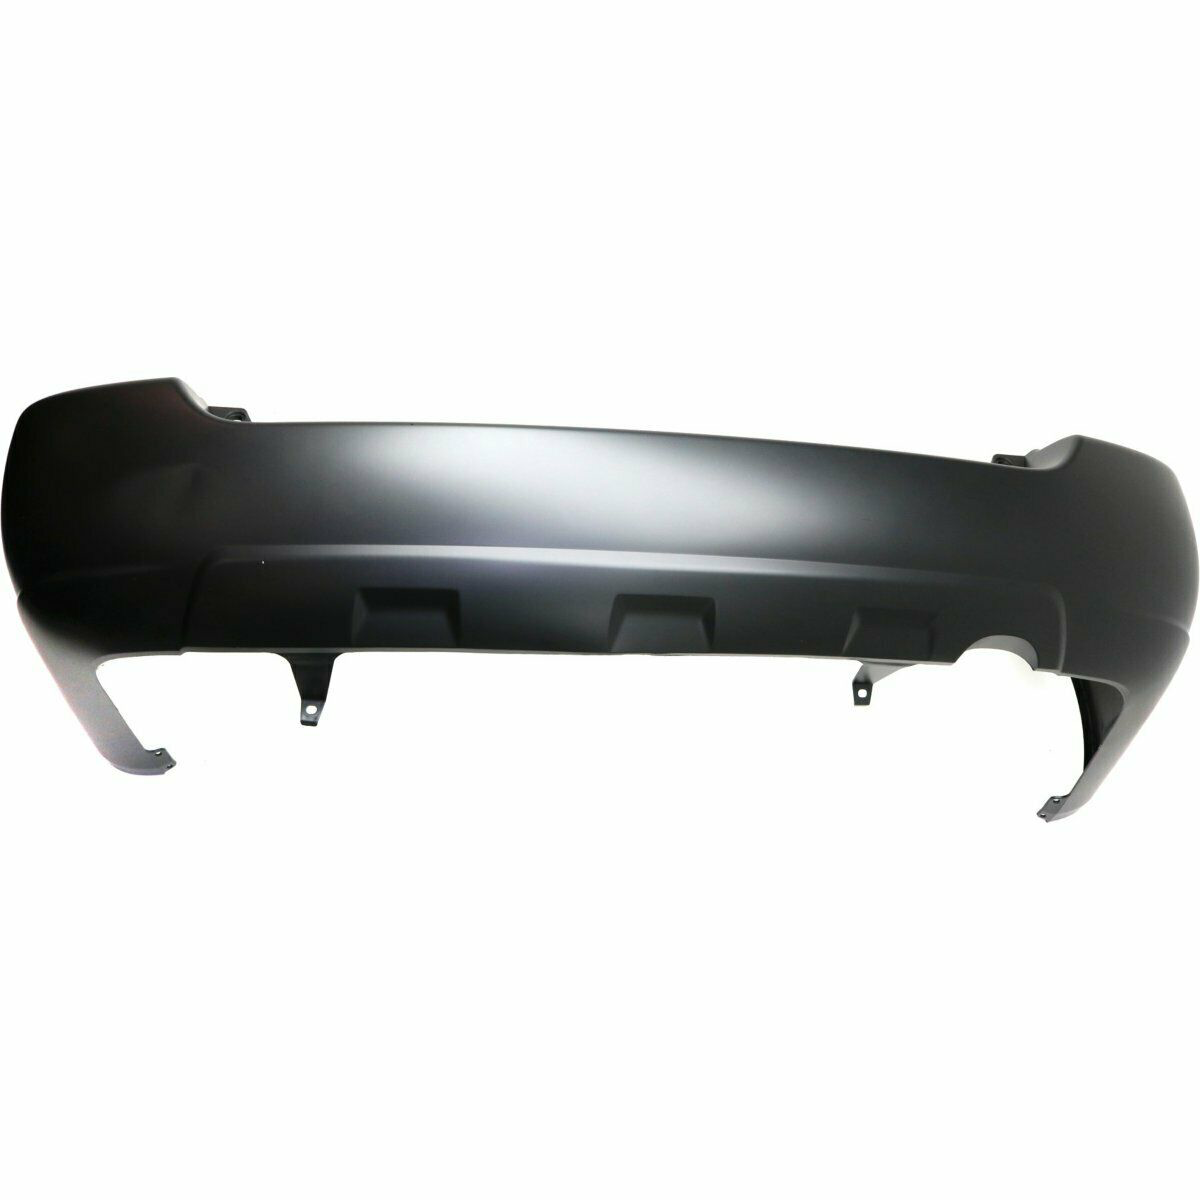 2004-2007 Toyota Highlander Rear Bumper Painted to Match